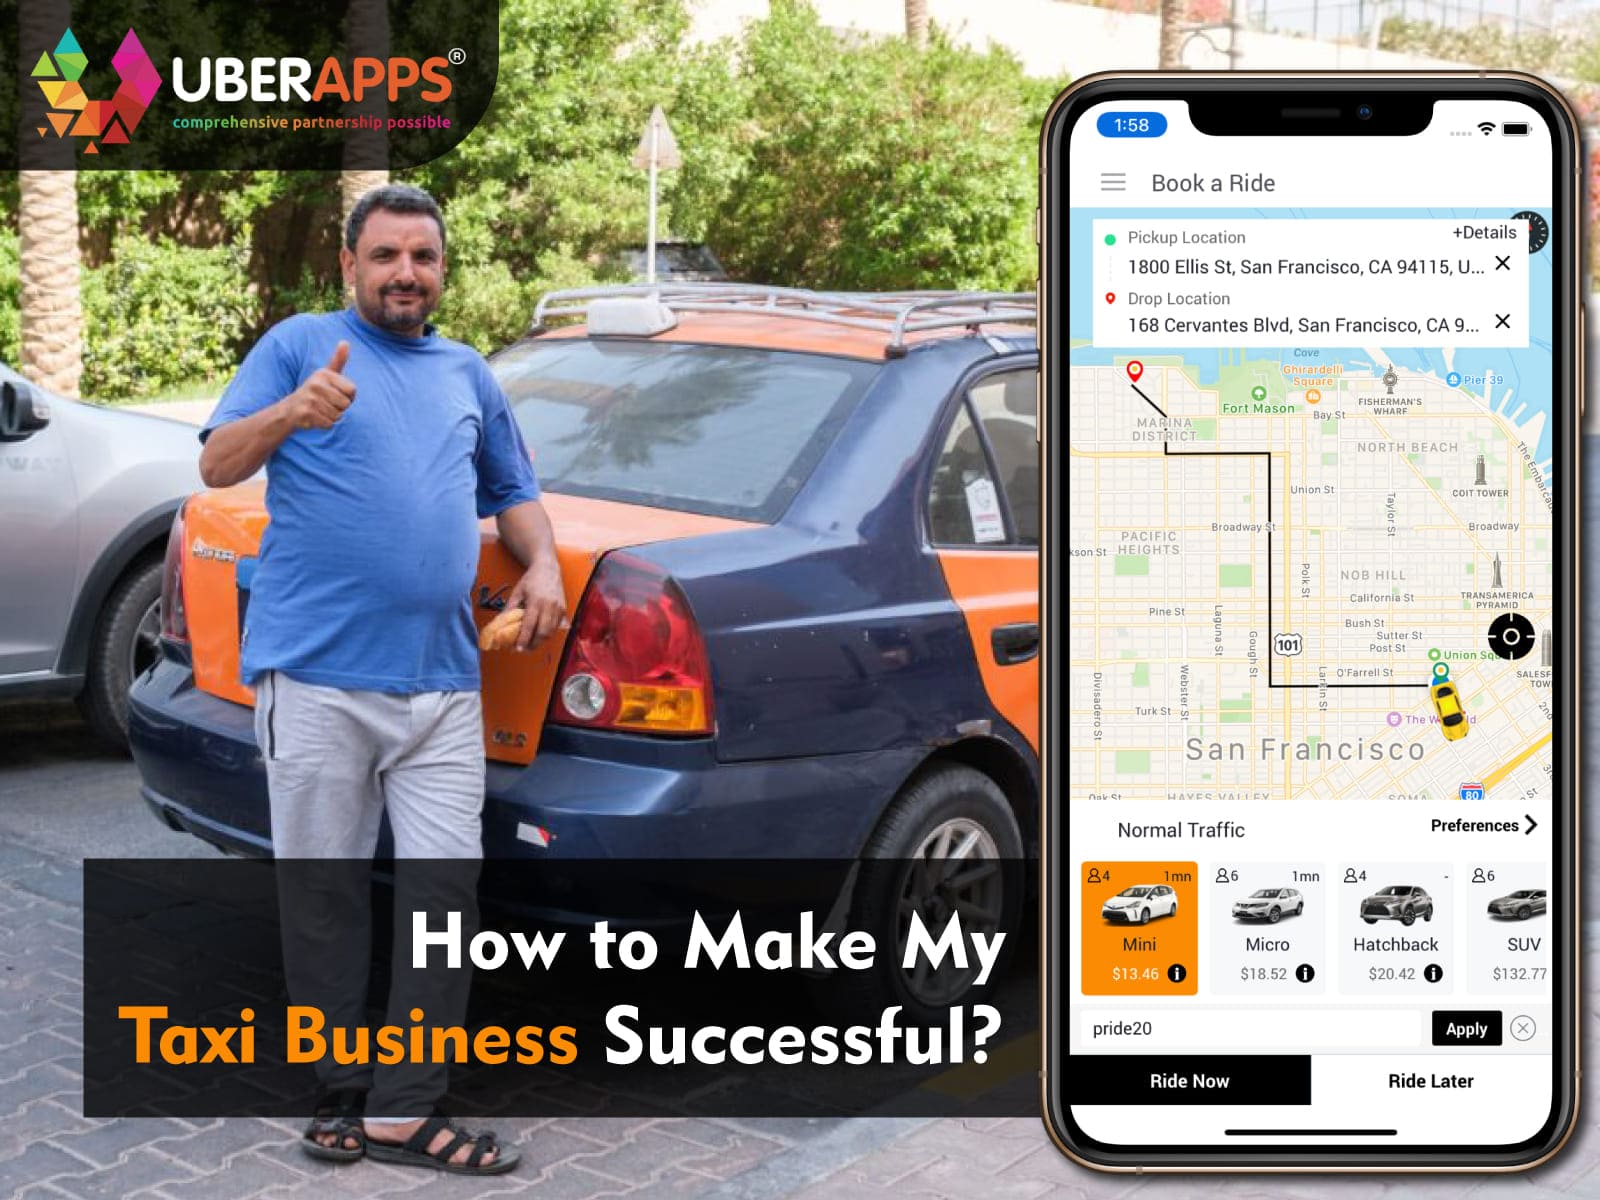 How to Make Taxi Business Successful?